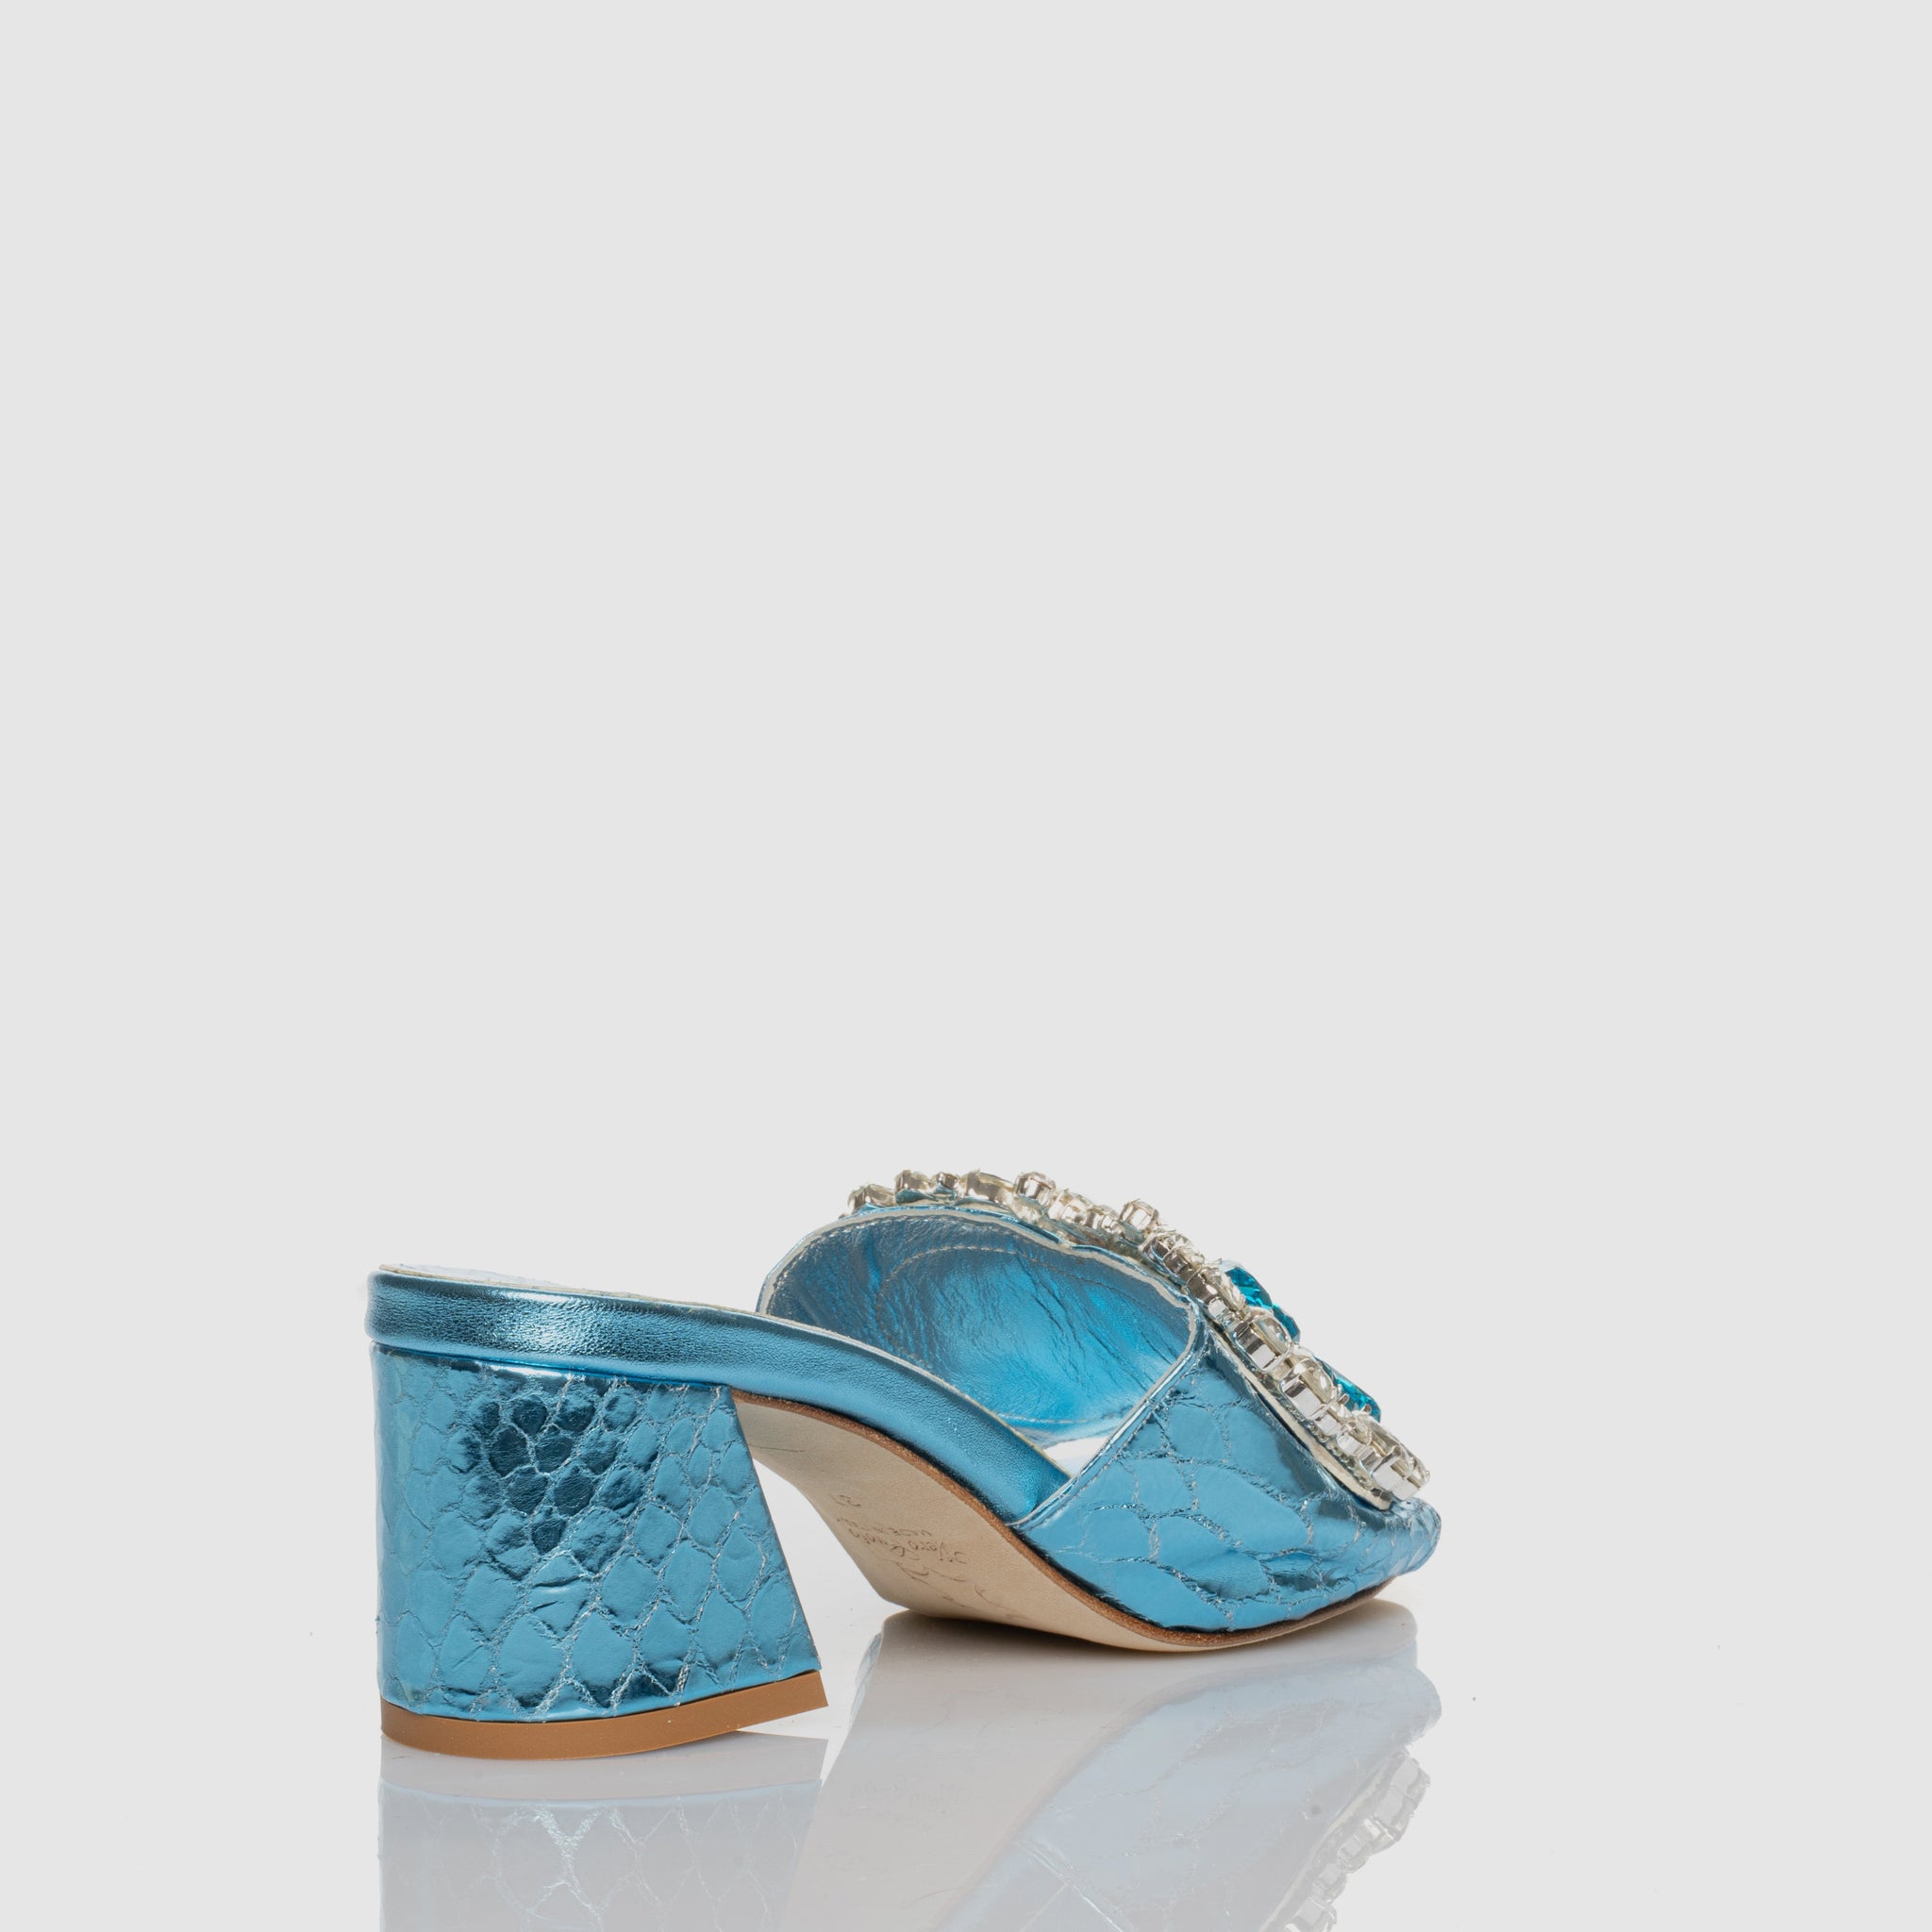 Bright Bow Blue High Heel Sandal in Nappa with bow-themed crystals